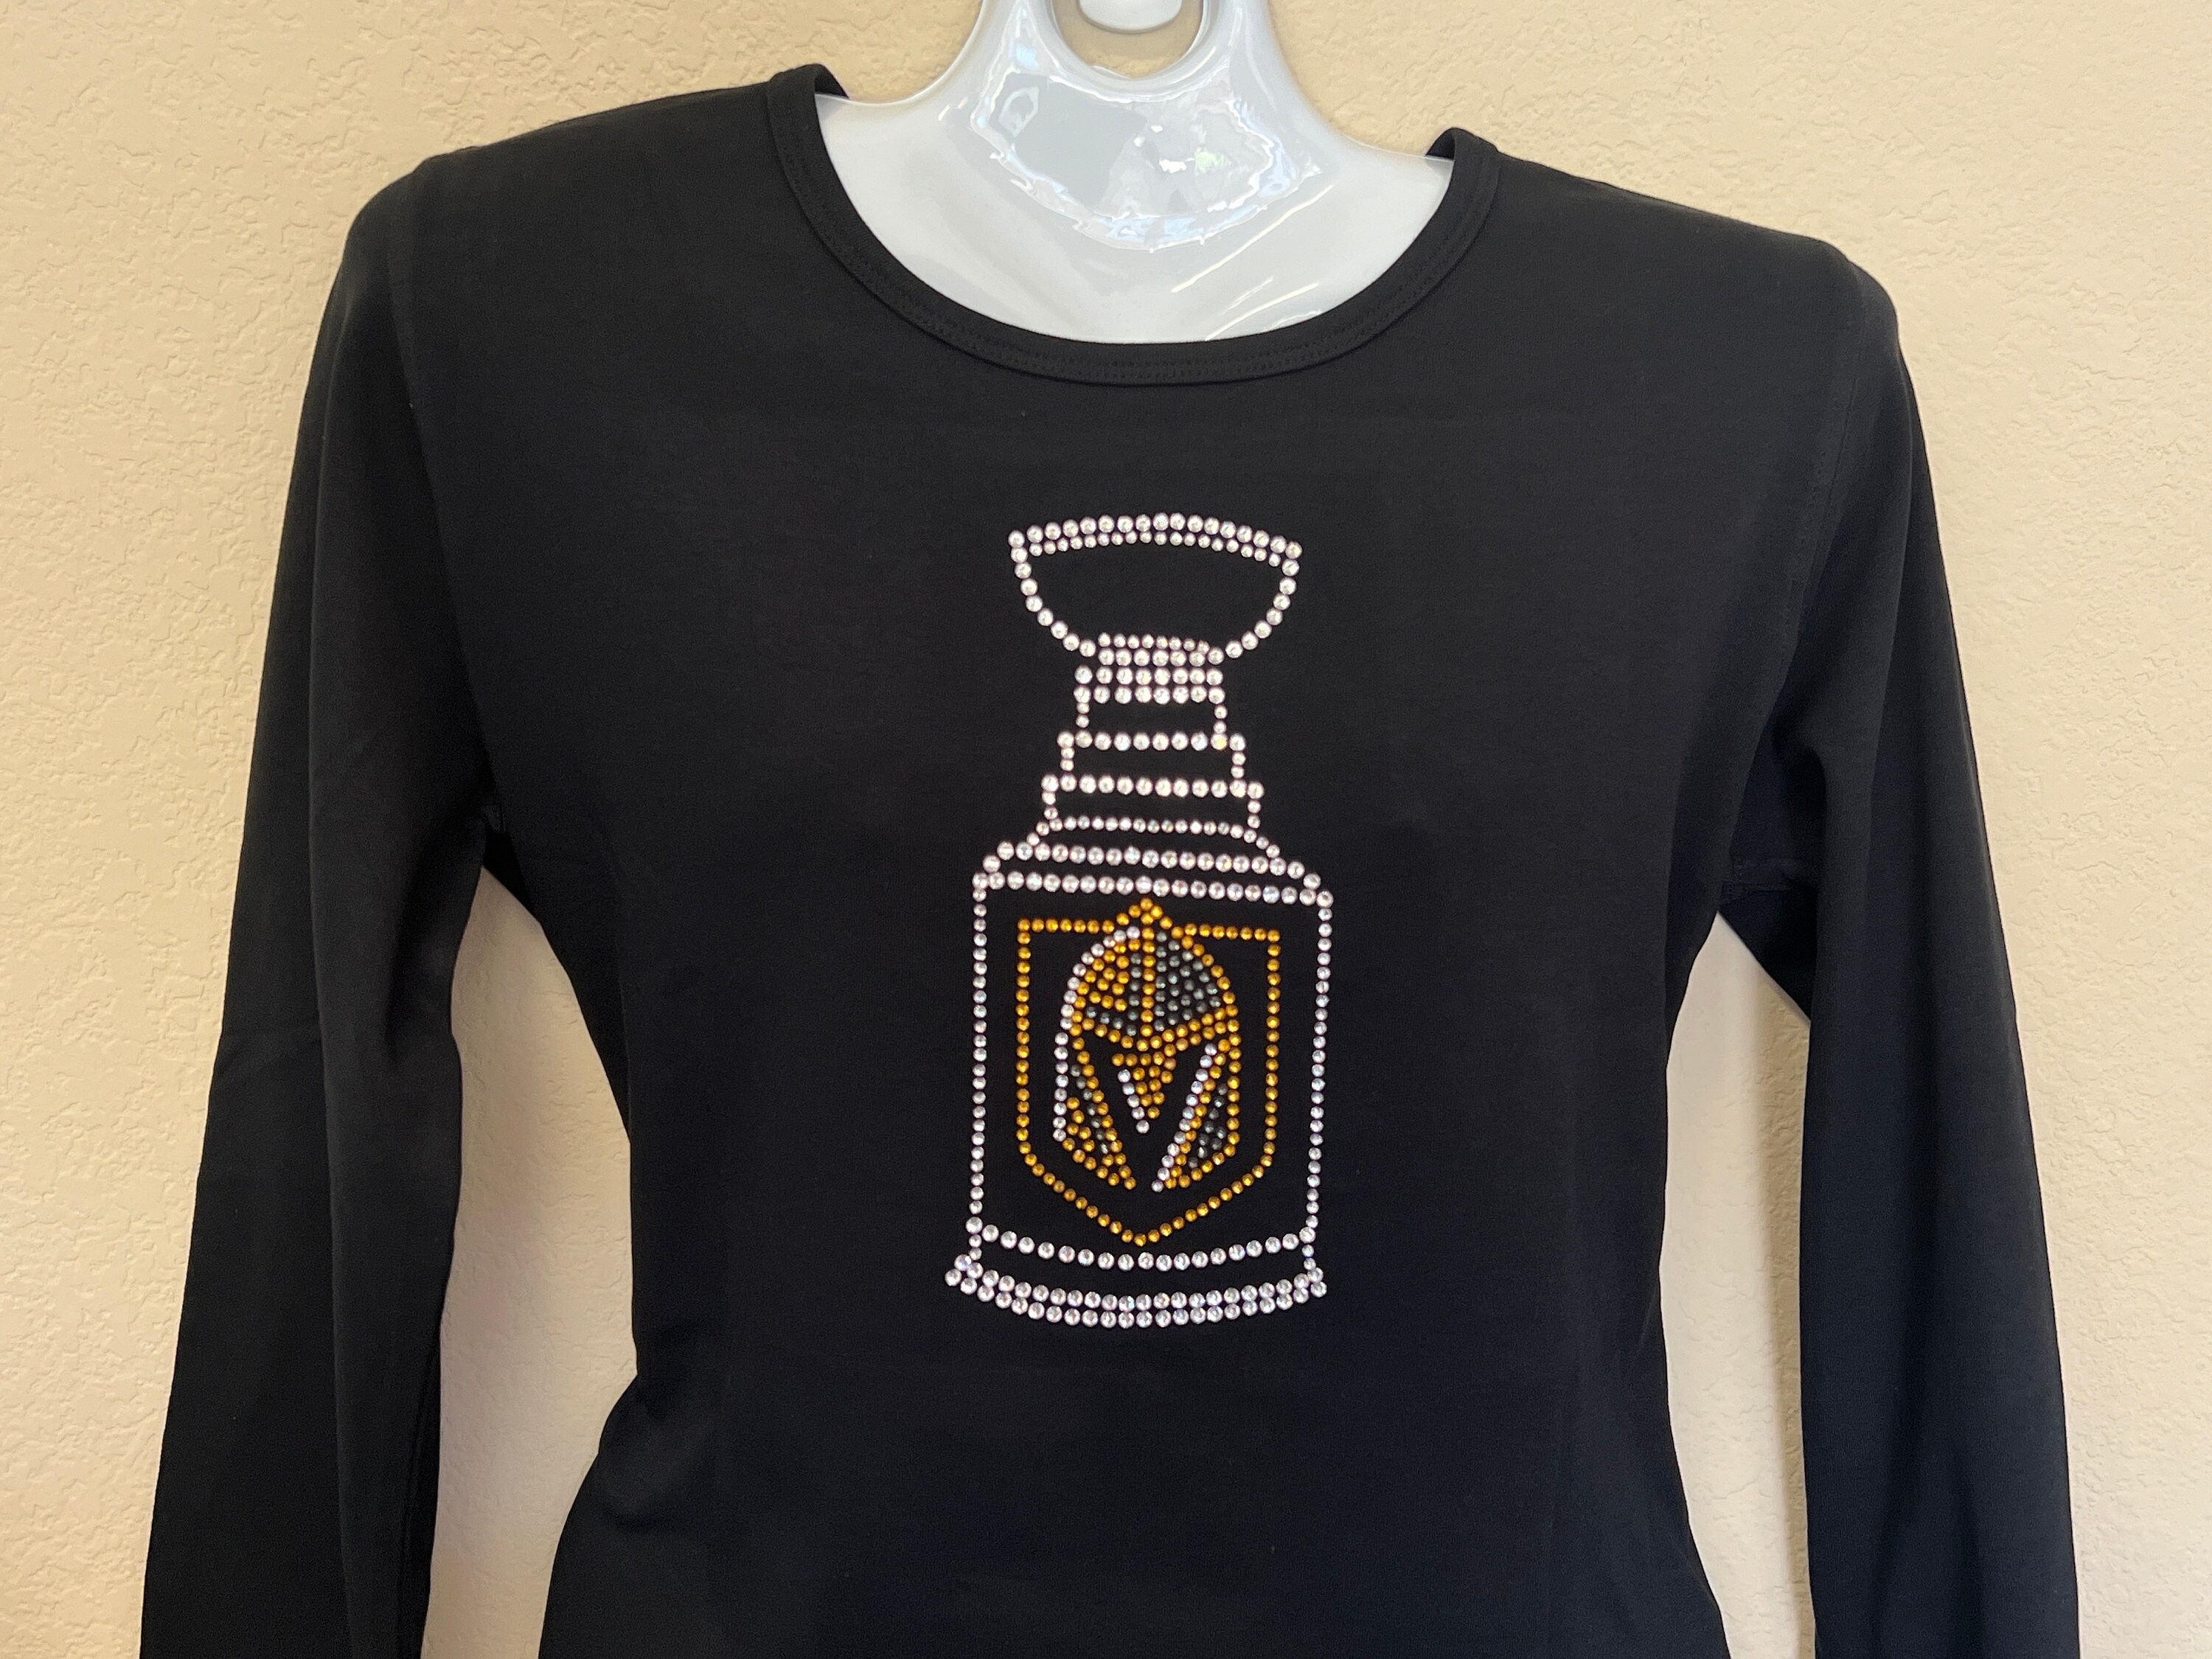 Official Vegas golden knights merch collection henderson silver knights  hockey dual logo crewneck shirt, hoodie, sweater, long sleeve and tank top